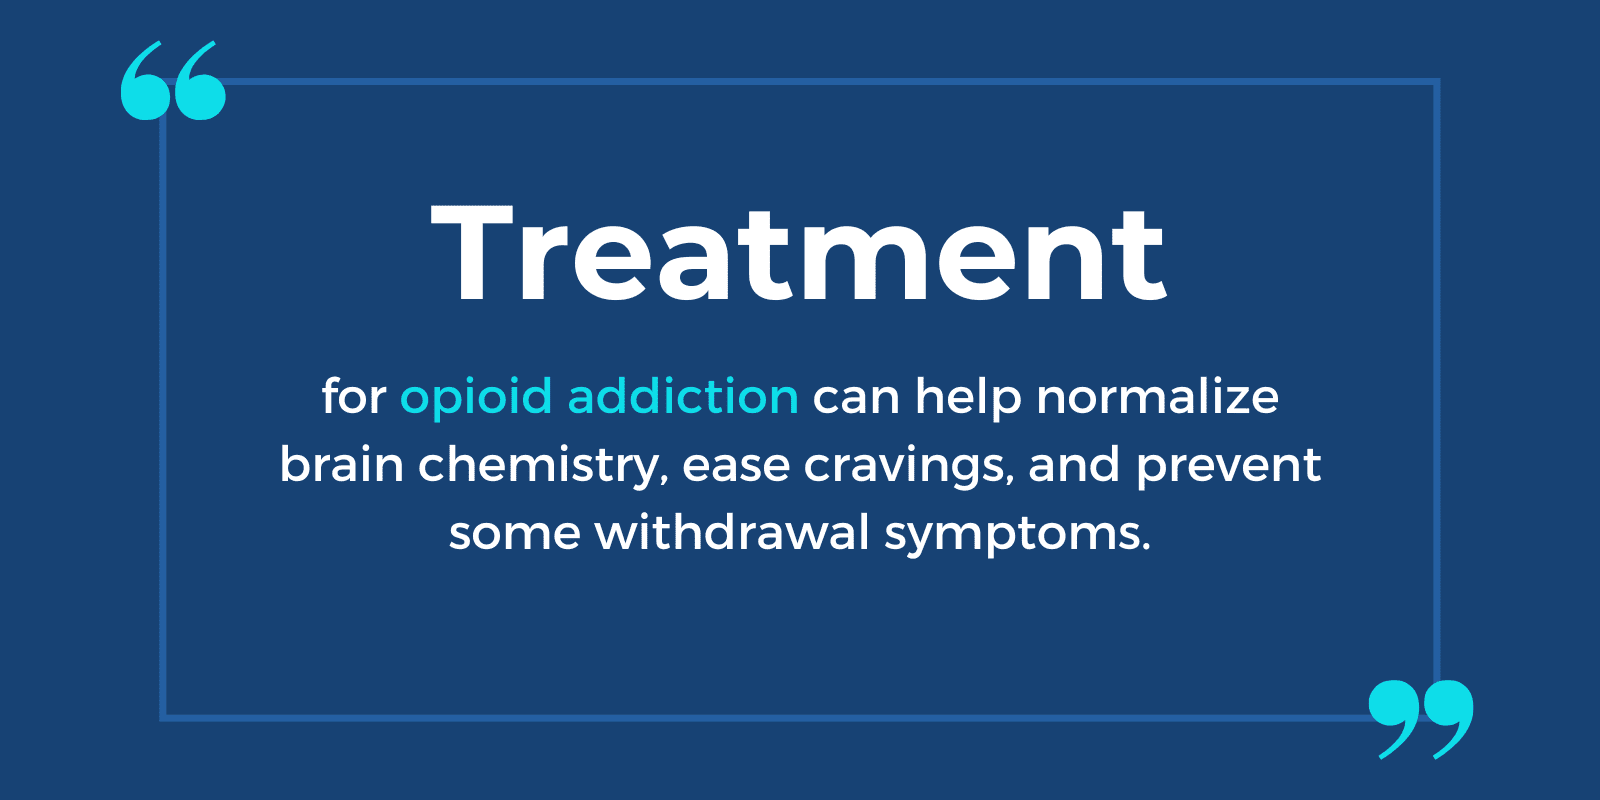 How treatment for opioid addiction benefits people